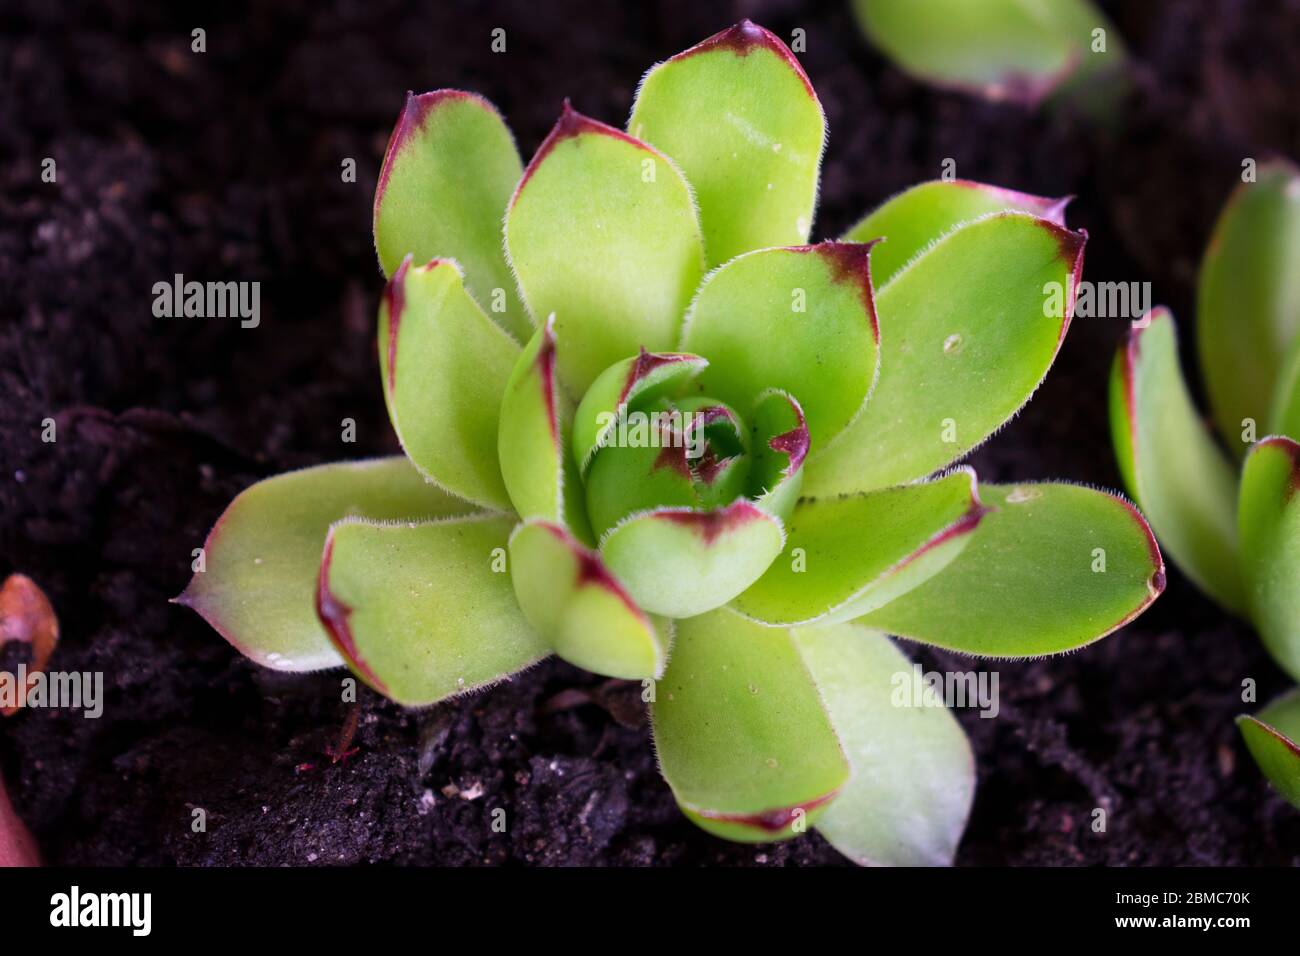 Easily grown Sempervivum Tectorum, also known as Hens and Chicks plant, one of natures hardy succulent plants with geometrically growing leaves. -04 Stock Photo